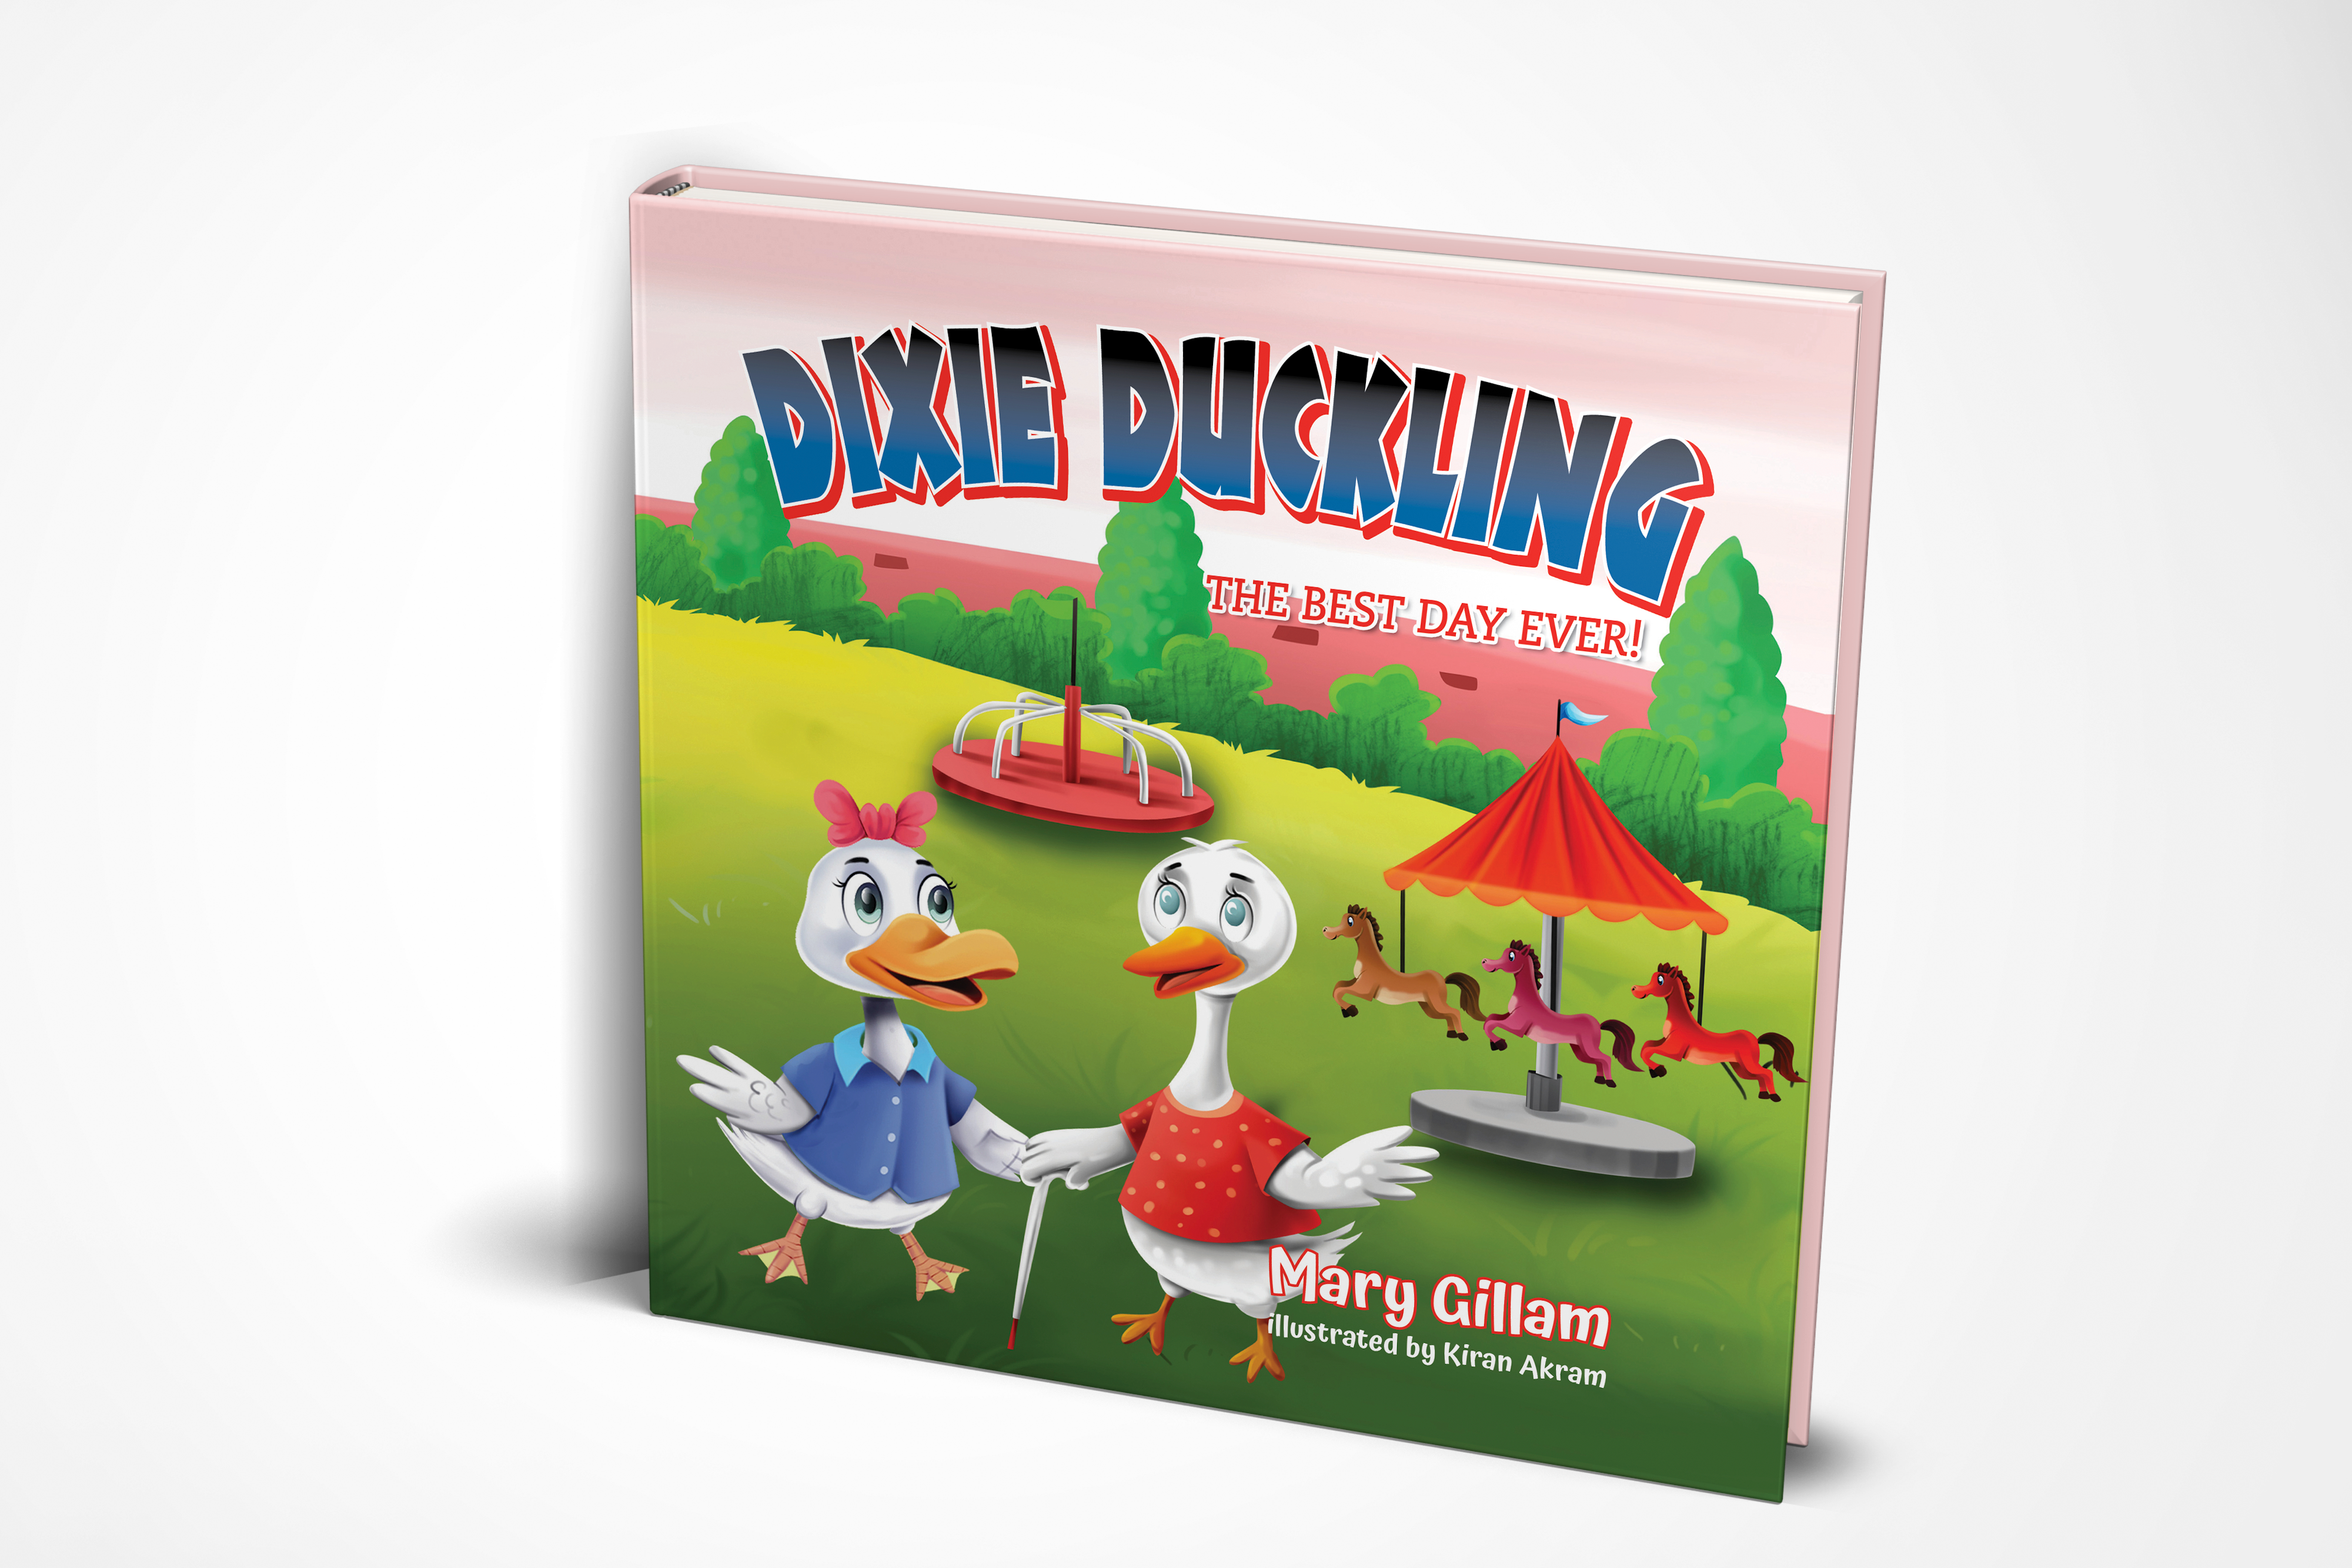 Dixie Duckling: The Best Day Ever!